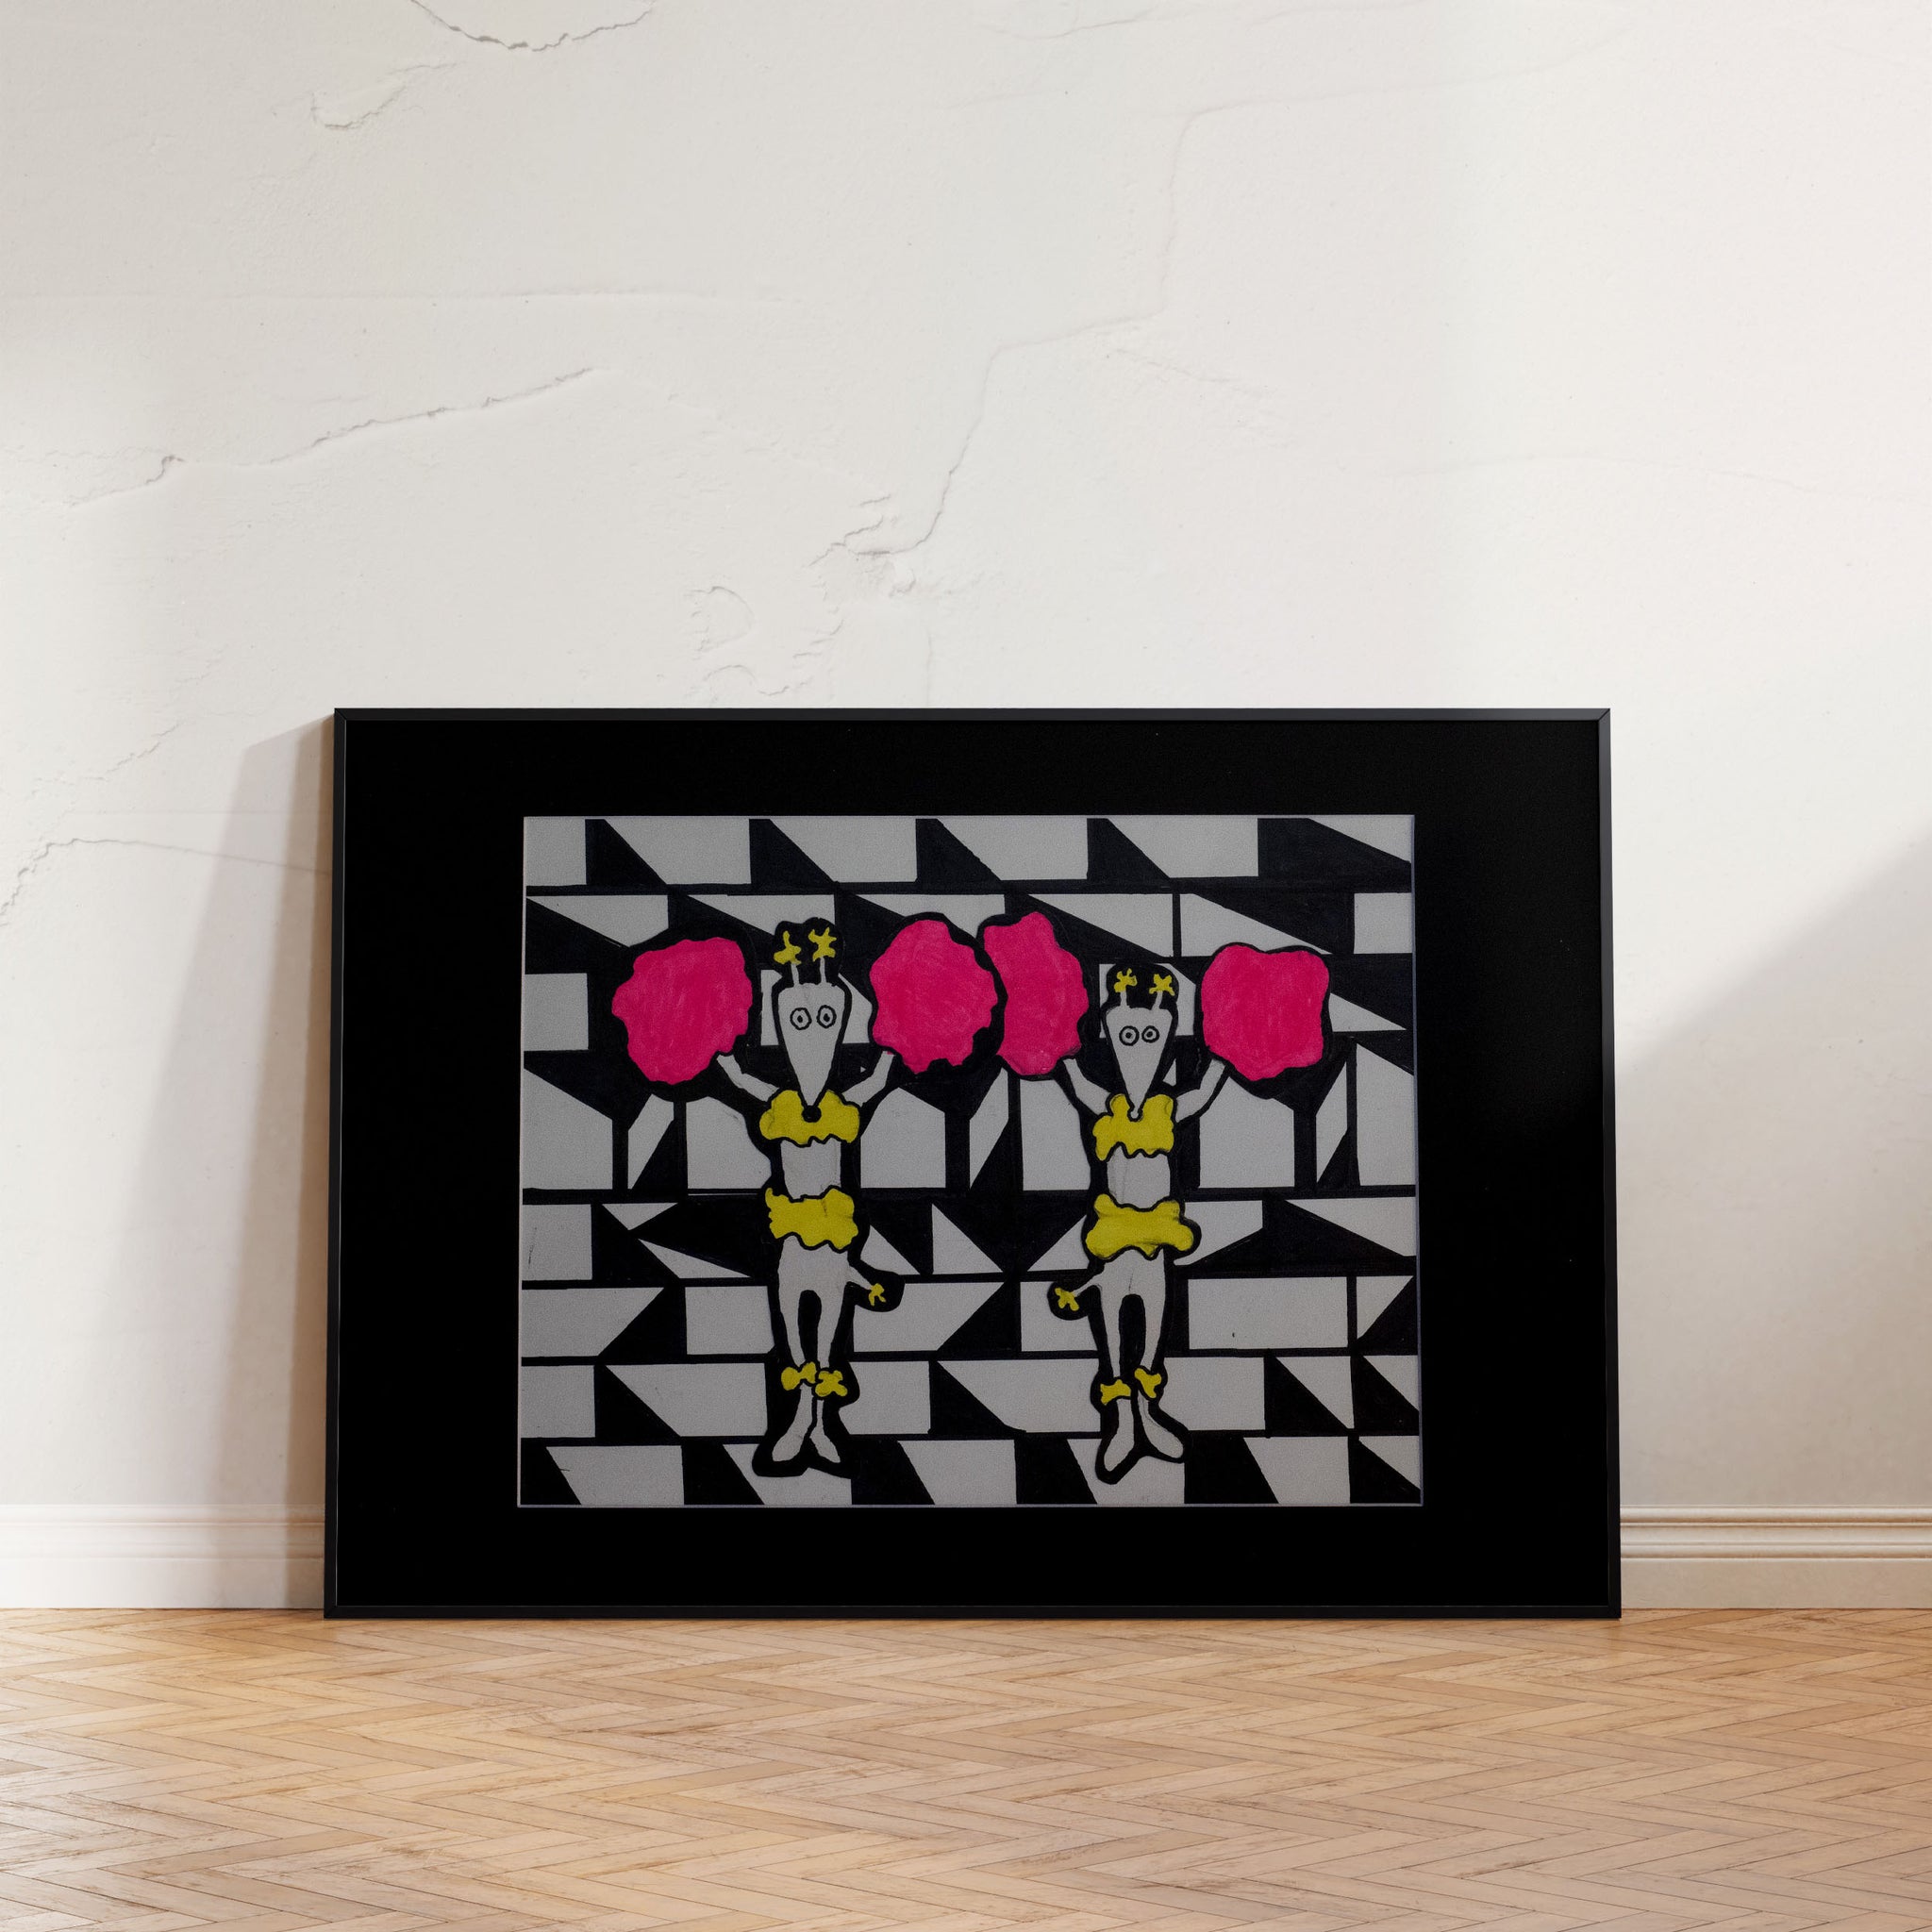 "Pom Pom Poodles," a lively, pop art inspired artwork showcasing two playful poodle characters dressed as cheerleaders in bold, graphic dark pink and yellow, spreading energy and joy in any space.